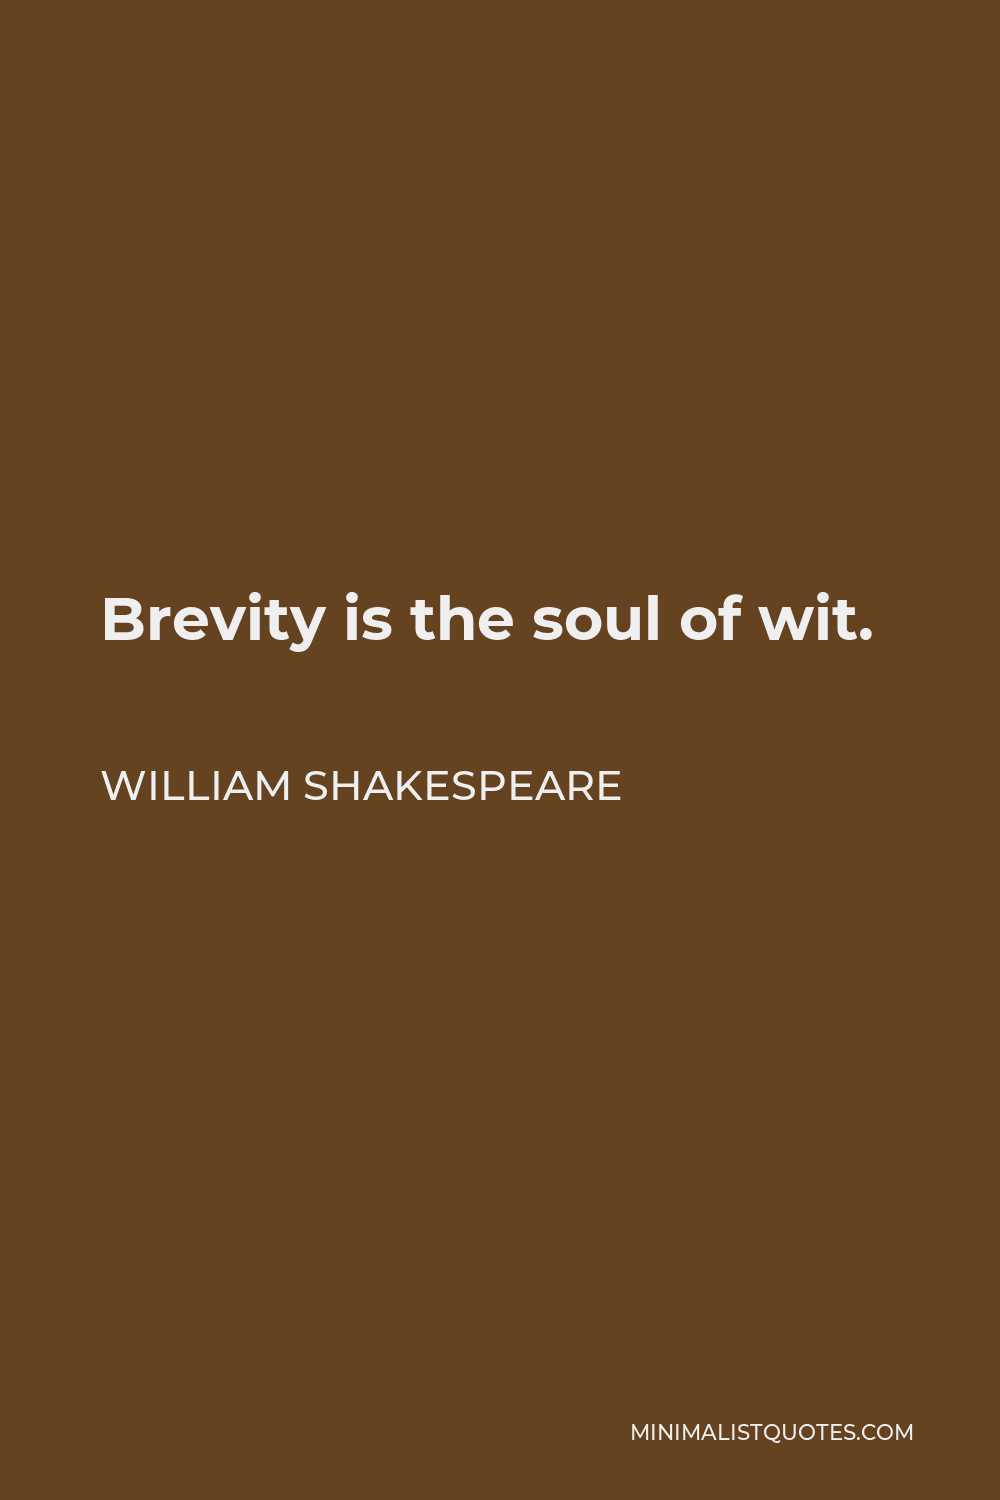 William Shakespeare Quote - Brevity is the soul of wit.